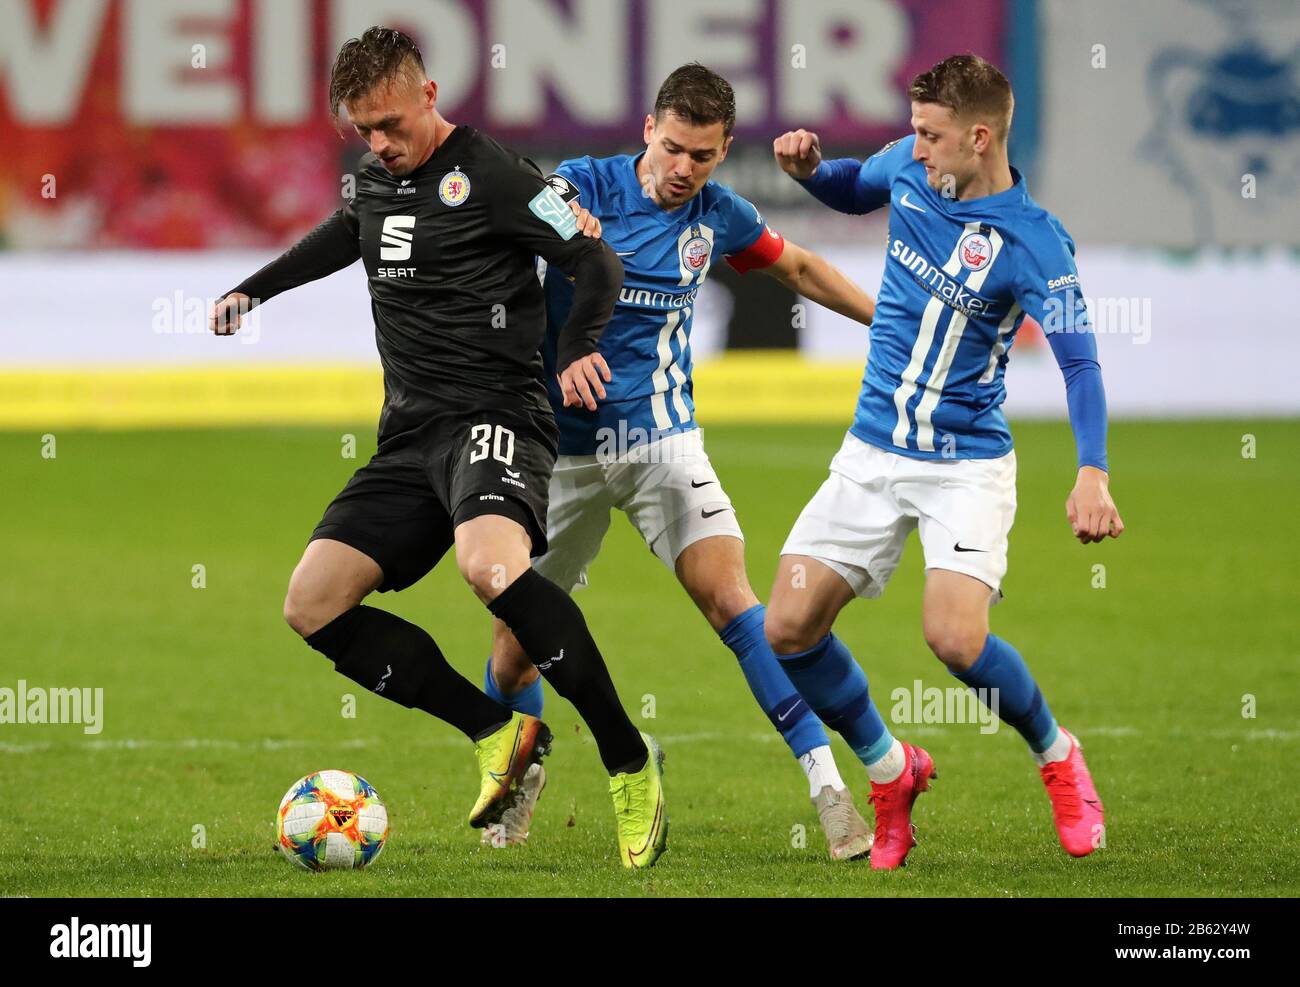 Rostock, Germany. 09th Mar, 2020. Football: 3rd league, 27th matchday,  Hansa Rostock - Eintracht Braunschweig in the Baltic Sea Stadium Brunswick  player Marvin Pourie (l-r), Hansa captain Julian Riedel and Hansa player